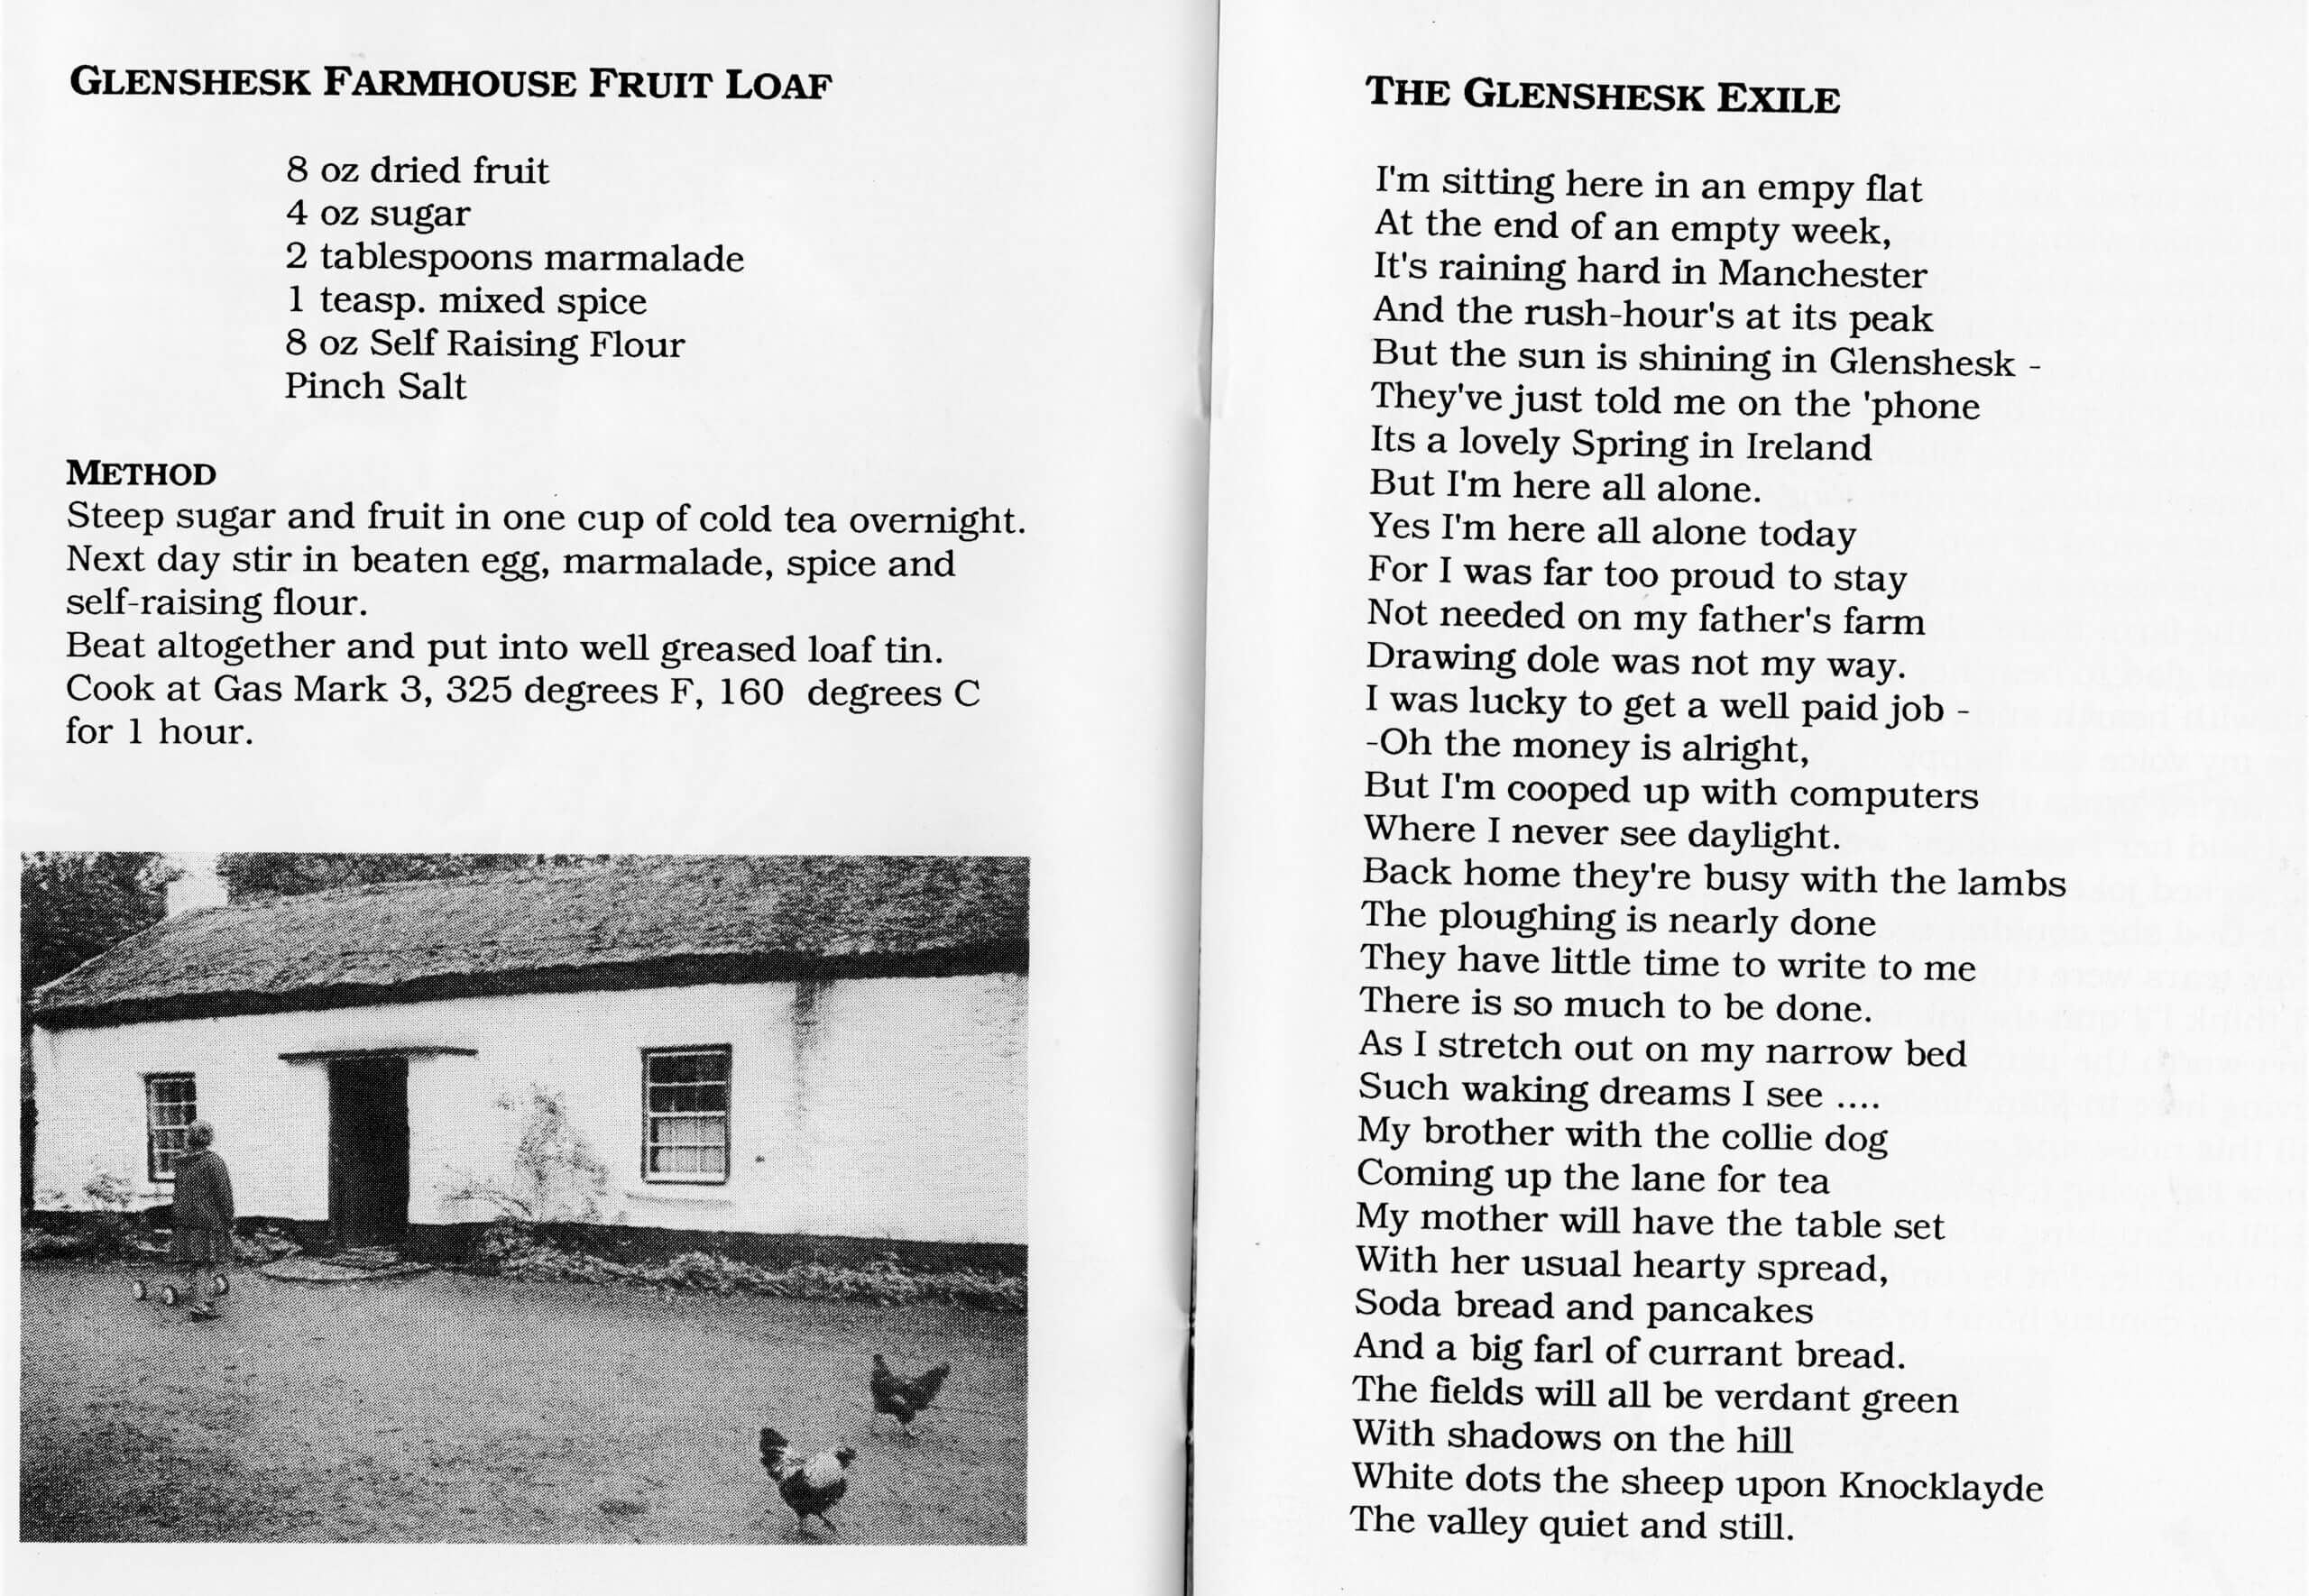 The Glenshesk Exile by Brigid Winter, from He Kissed Me at the Causeway, 1996